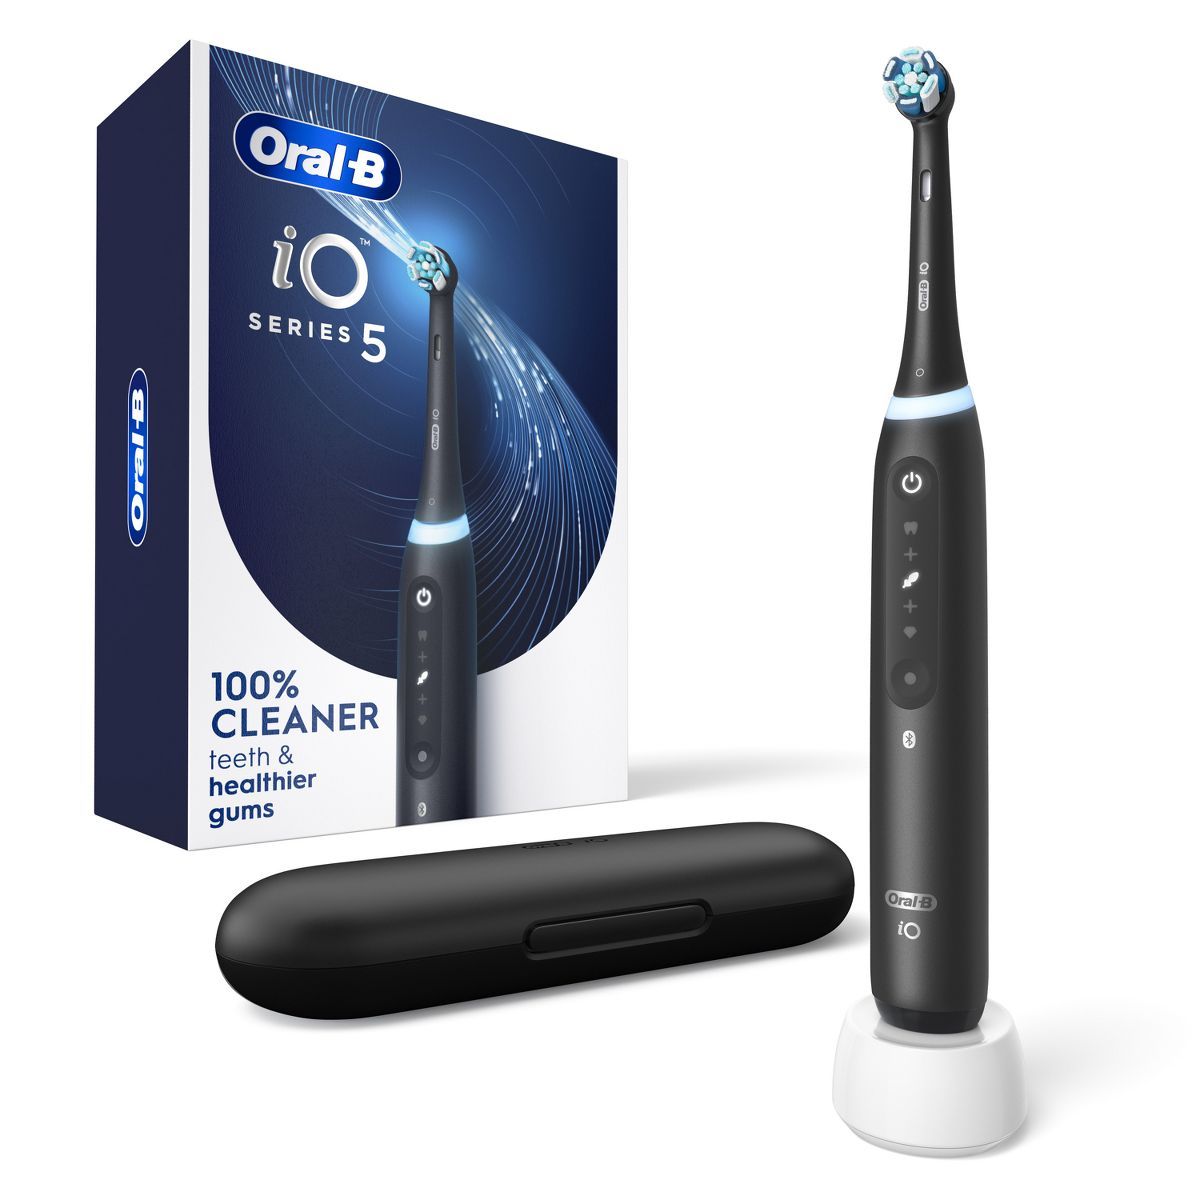 Oral-B iO Series 5 Electric Toothbrush with Brush Head | Target